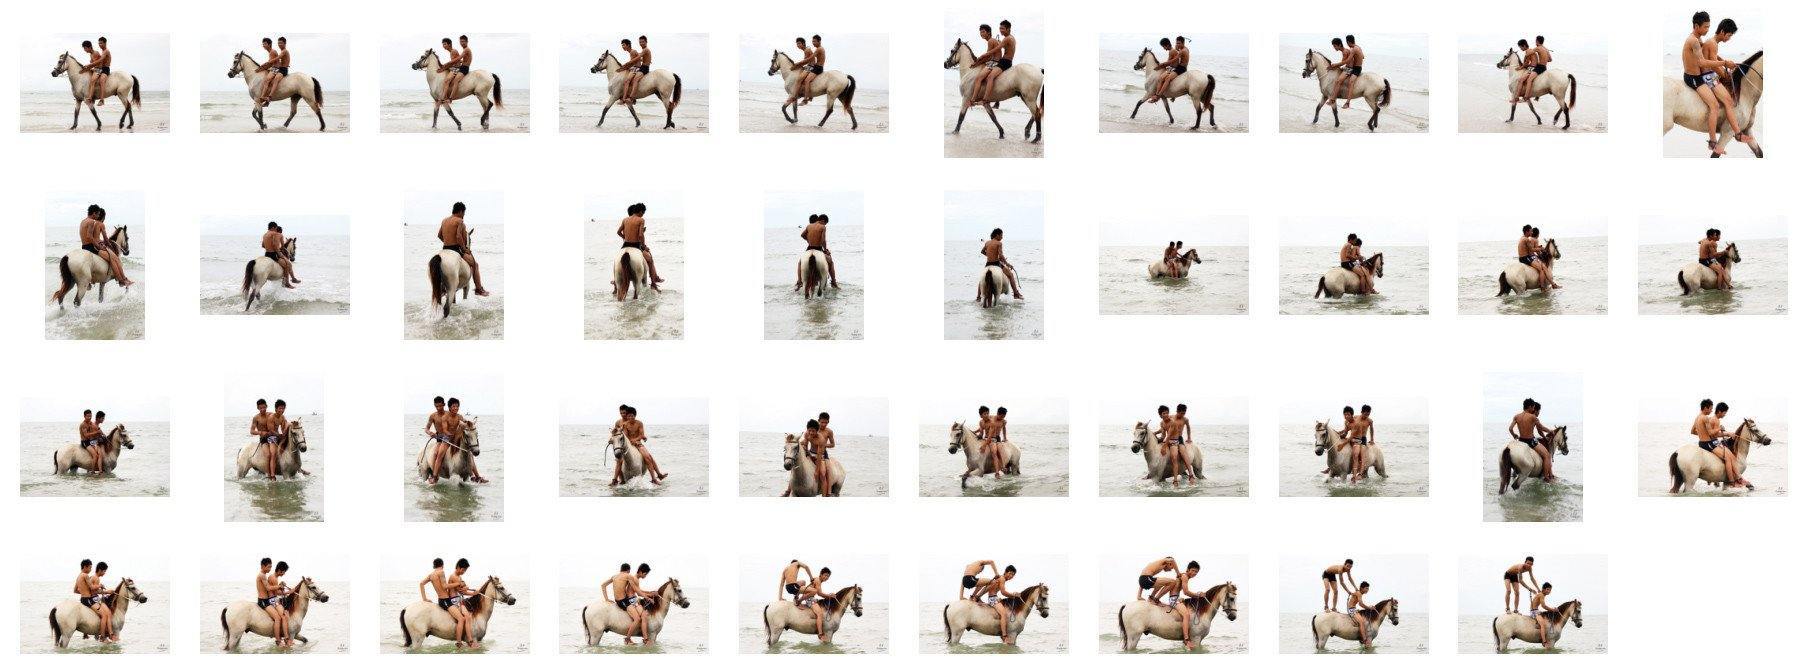 David and Thaksin in Shorts Riding Bareback and Double on Buckskin Horse, Part 5 - Riding.Vision